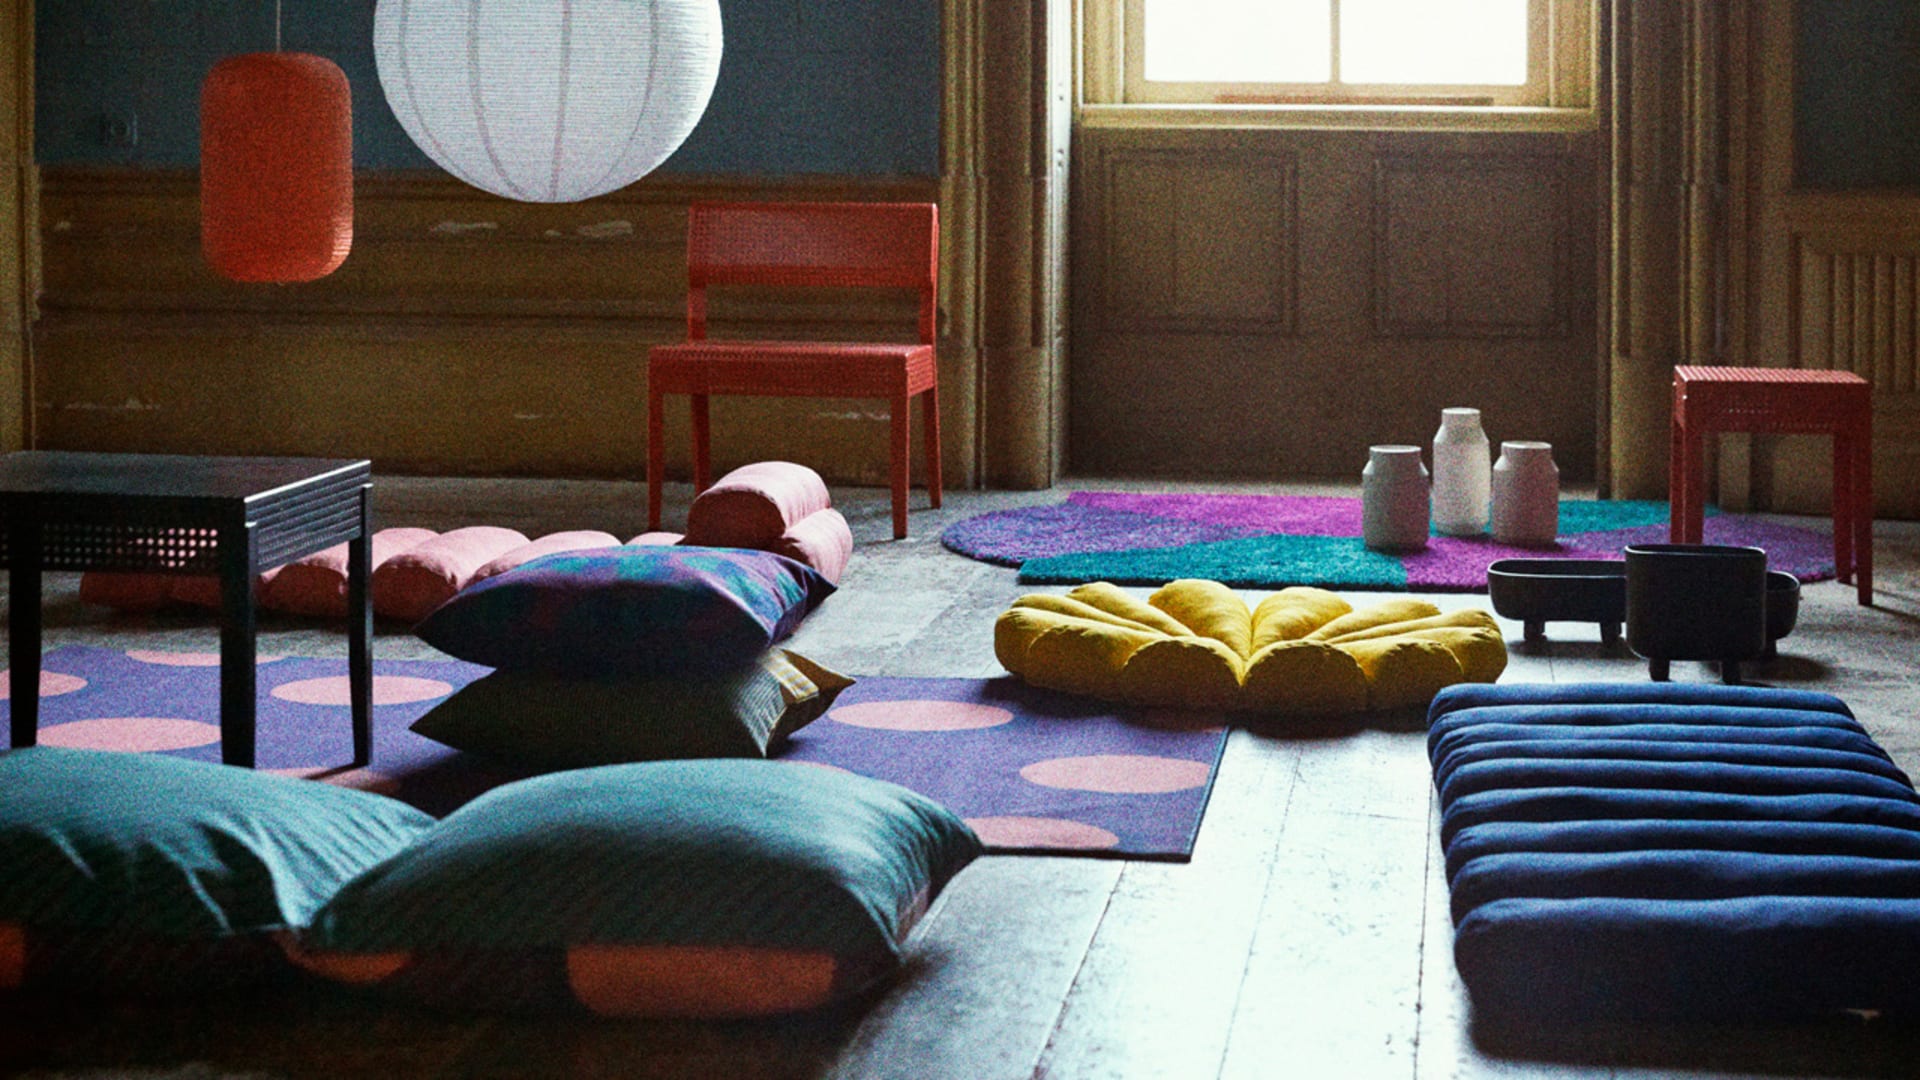 Ikea’s extremely chill new collection just hangs out on the floor